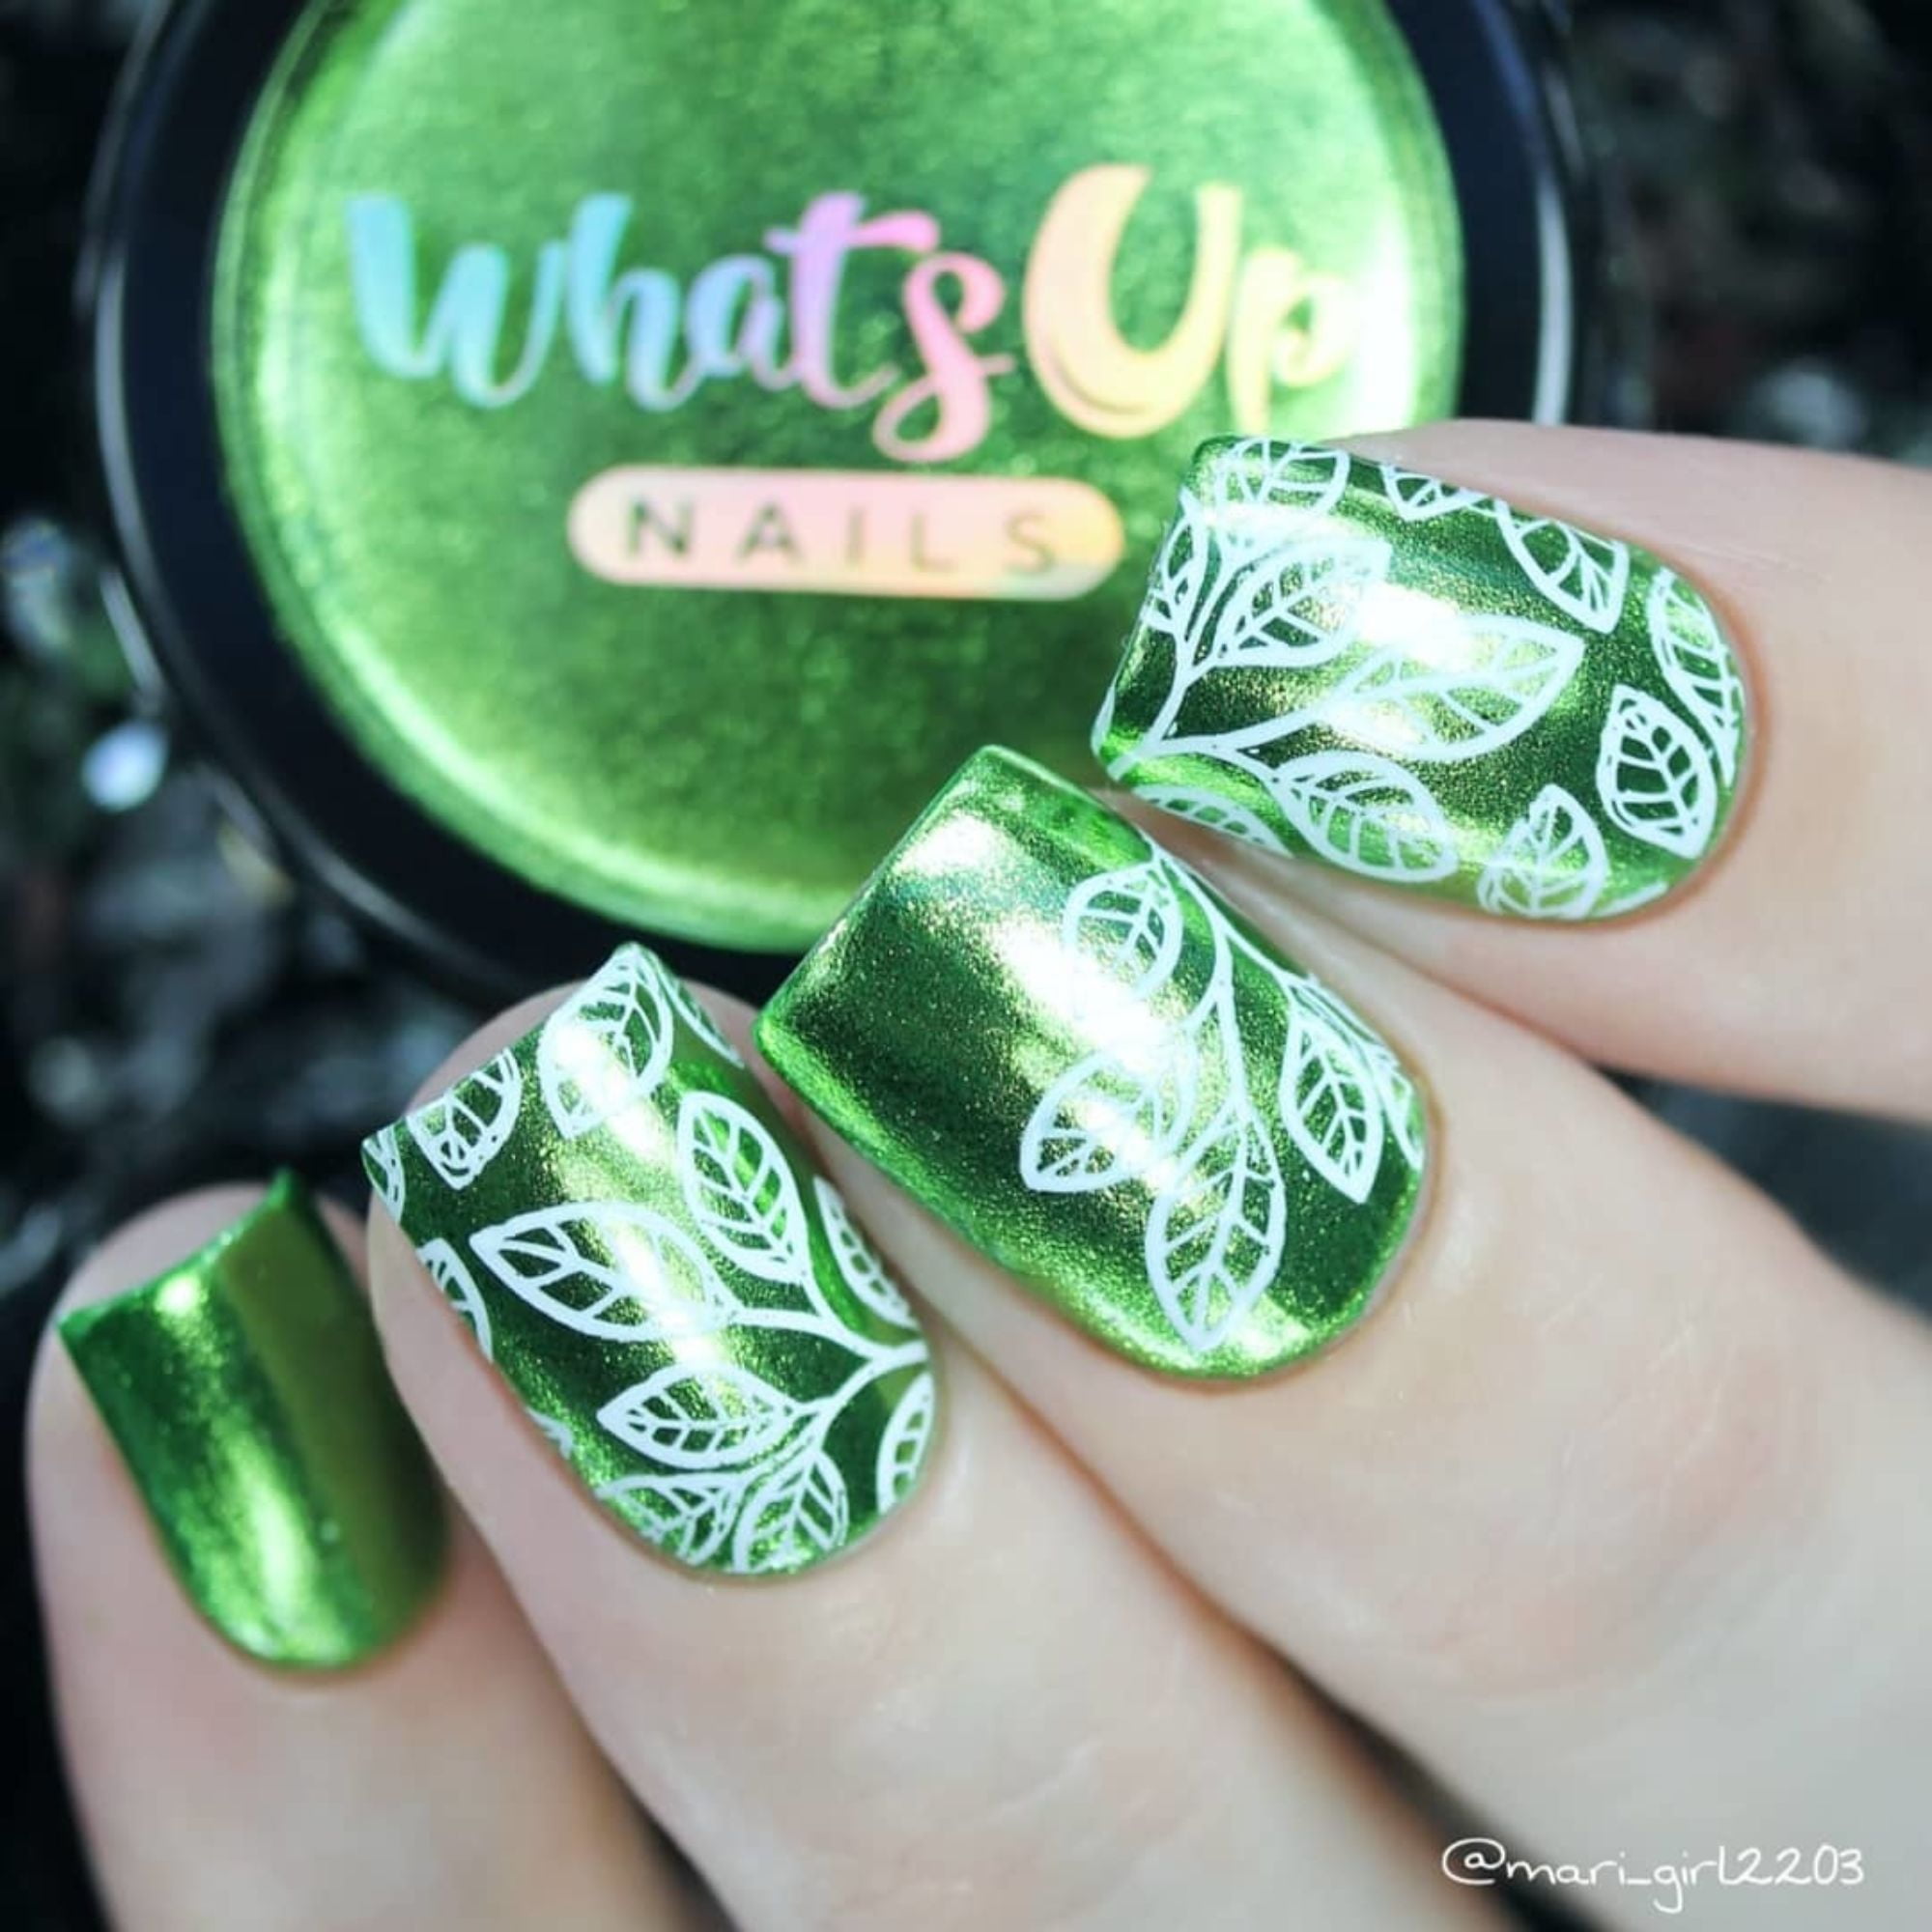 Whats Up Nails - Pear Chrome Powder for Mirror Nails 